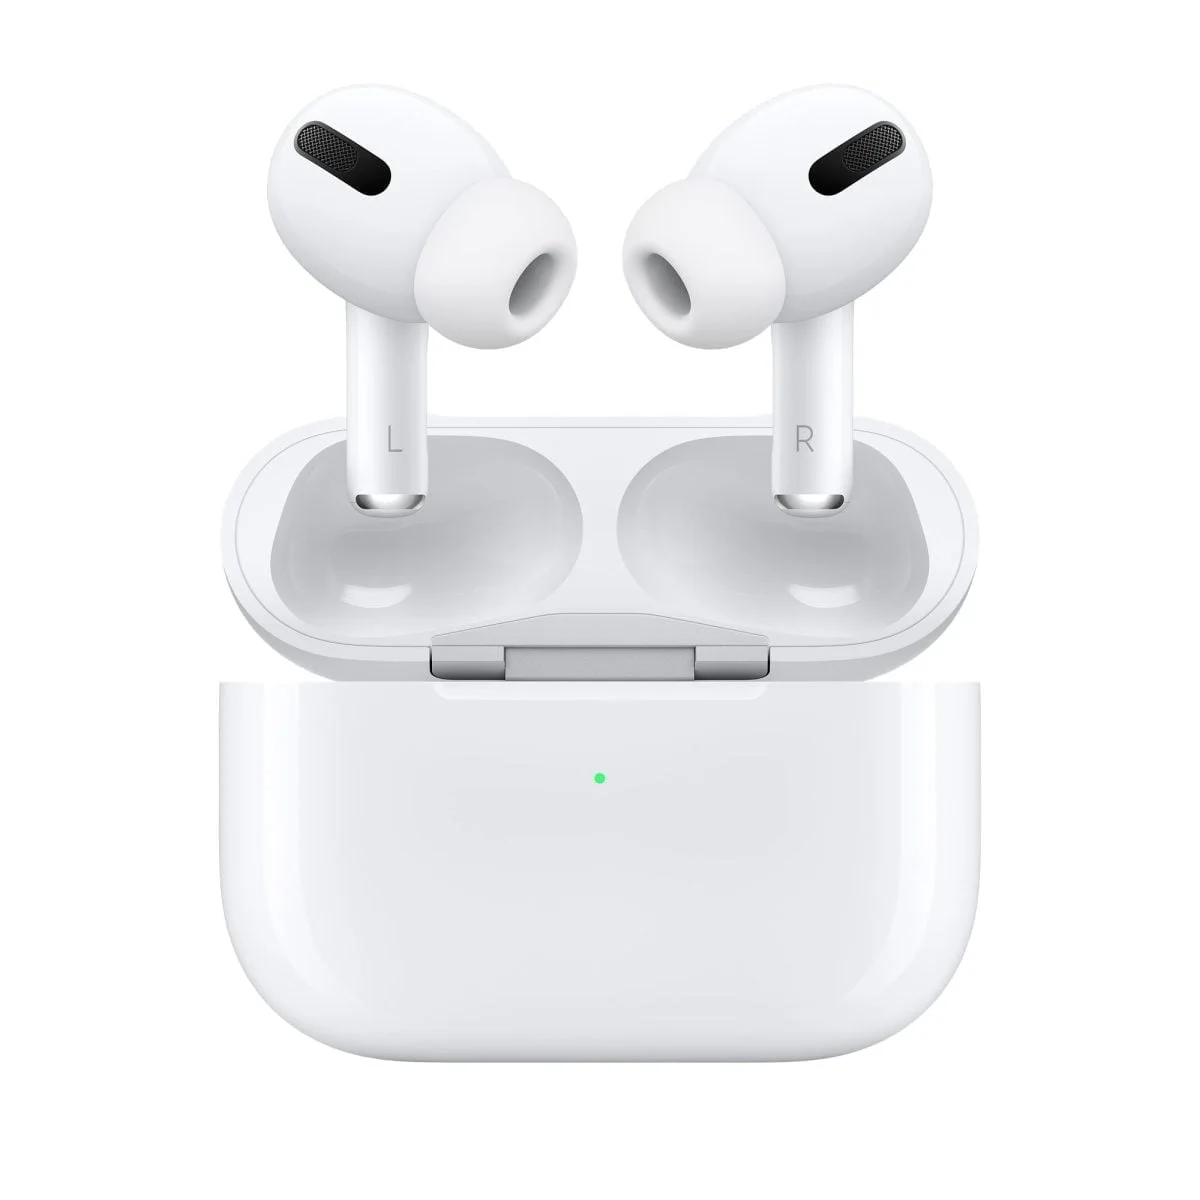 Mlwk3Ze Apple &Amp;Lt;Div Class=&Amp;Quot;Rc-Pdsection-Sidepanel Column Large-3 Small-12&Amp;Quot;&Amp;Gt; &Amp;Lt;H1&Amp;Gt;Apple Airpods Pro (With Magsafe Charging Case) - White&Amp;Lt;/H1&Amp;Gt; &Amp;Lt;/Div&Amp;Gt; &Amp;Lt;Div Class=&Amp;Quot;Rc-Pdsection-Mainpanel Column Large-9 Small-12&Amp;Quot;&Amp;Gt; &Amp;Lt;H4 Class=&Amp;Quot;H4-Para-Title&Amp;Quot;&Amp;Gt;Magic Like You’ve Never Heard&Amp;Lt;/H4&Amp;Gt; &Amp;Lt;Div Class=&Amp;Quot;Para-List As-Pdp-Lastparalist&Amp;Quot;&Amp;Gt; Airpods Pro Have Been Designed To Deliver Active Noise Cancellation For Immersive Sound, Transparency Mode So You Can Hear Your Surroundings, And A Customizable Fit For All-Day Comfort. Just Like Airpods, Airpods Pro Connect Magically To Your Apple Devices. And They’re Ready To Use Right Out Of The Case. &Amp;Lt;/Div&Amp;Gt; &Amp;Lt;/Div&Amp;Gt; Airpods Pro Apple Airpods Pro (With Magsafe Charging Case) - White Mlwk3